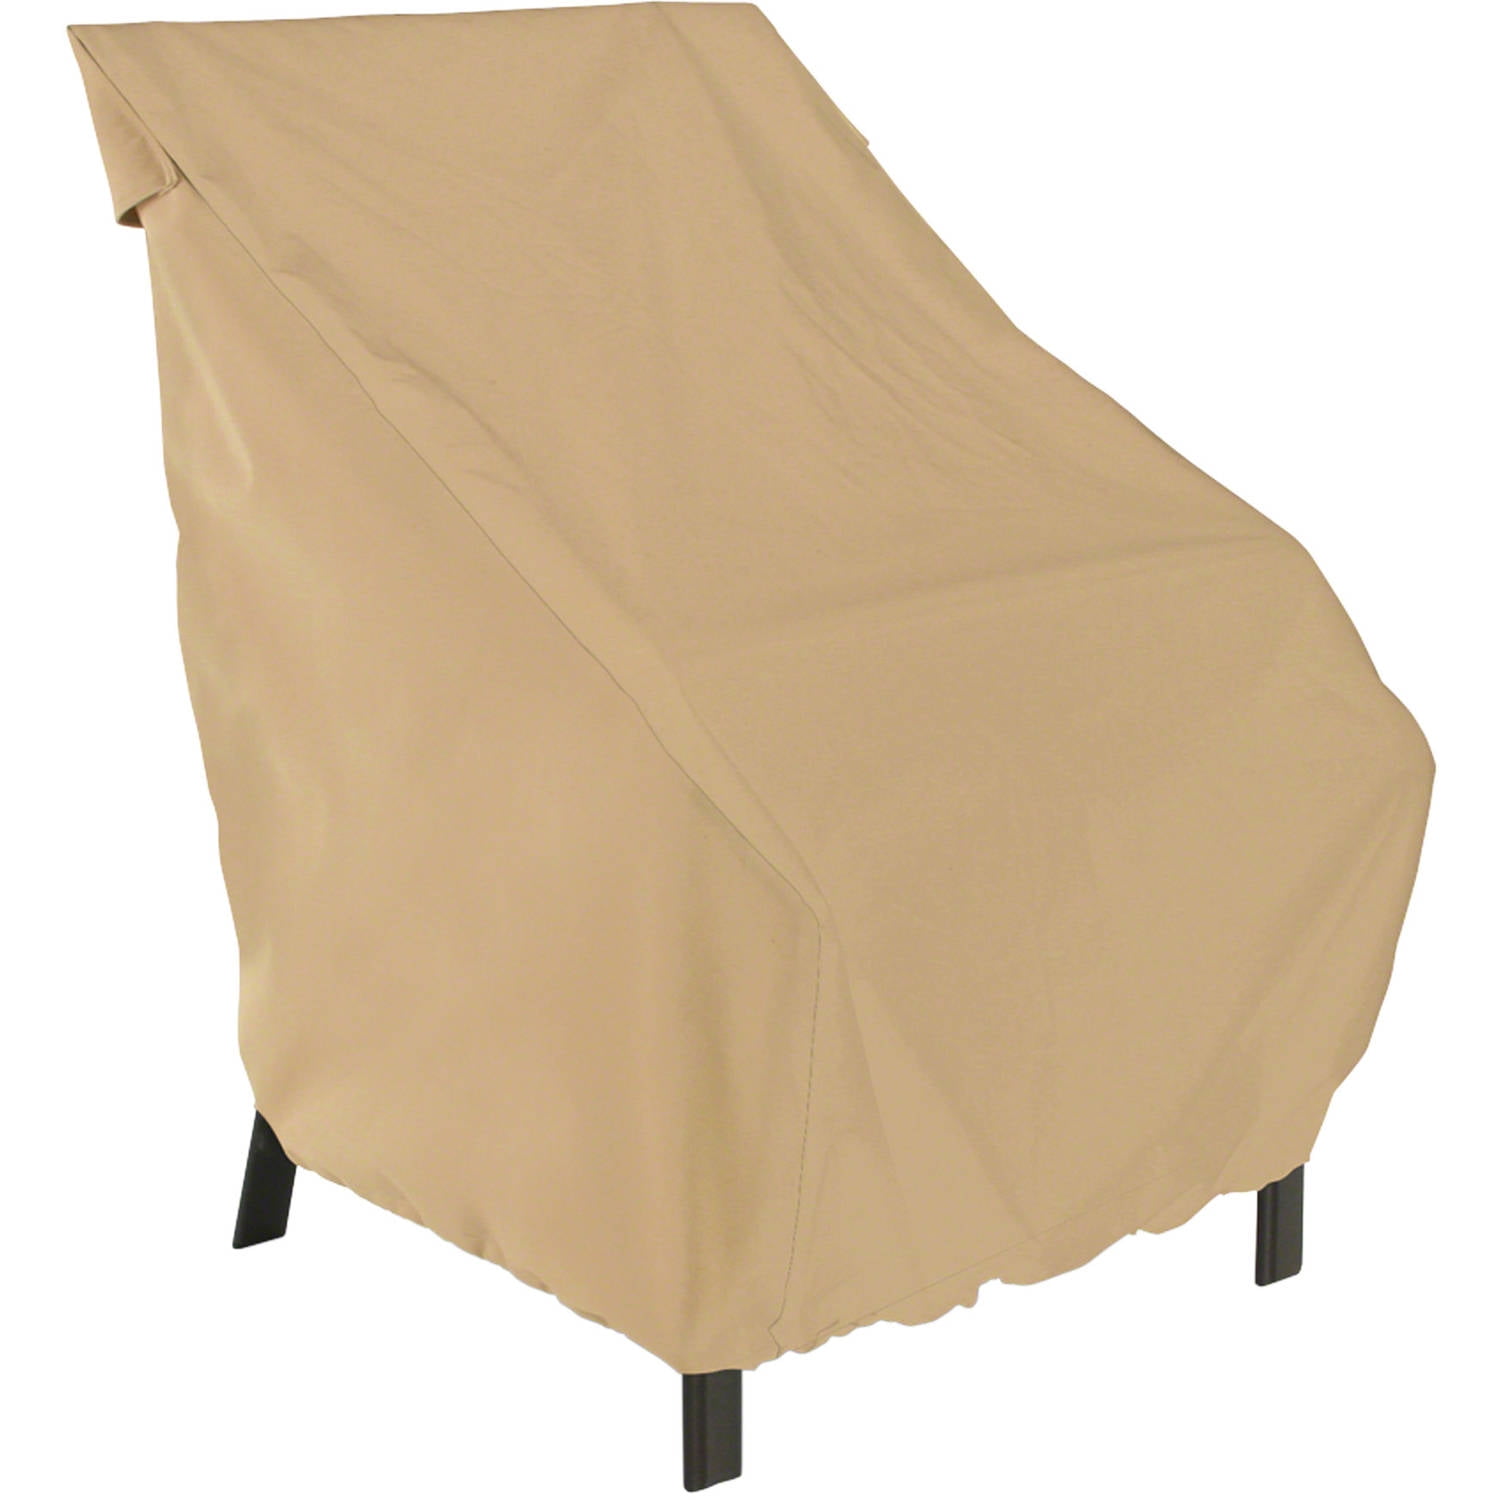 Kmart Chair Covers Off 71